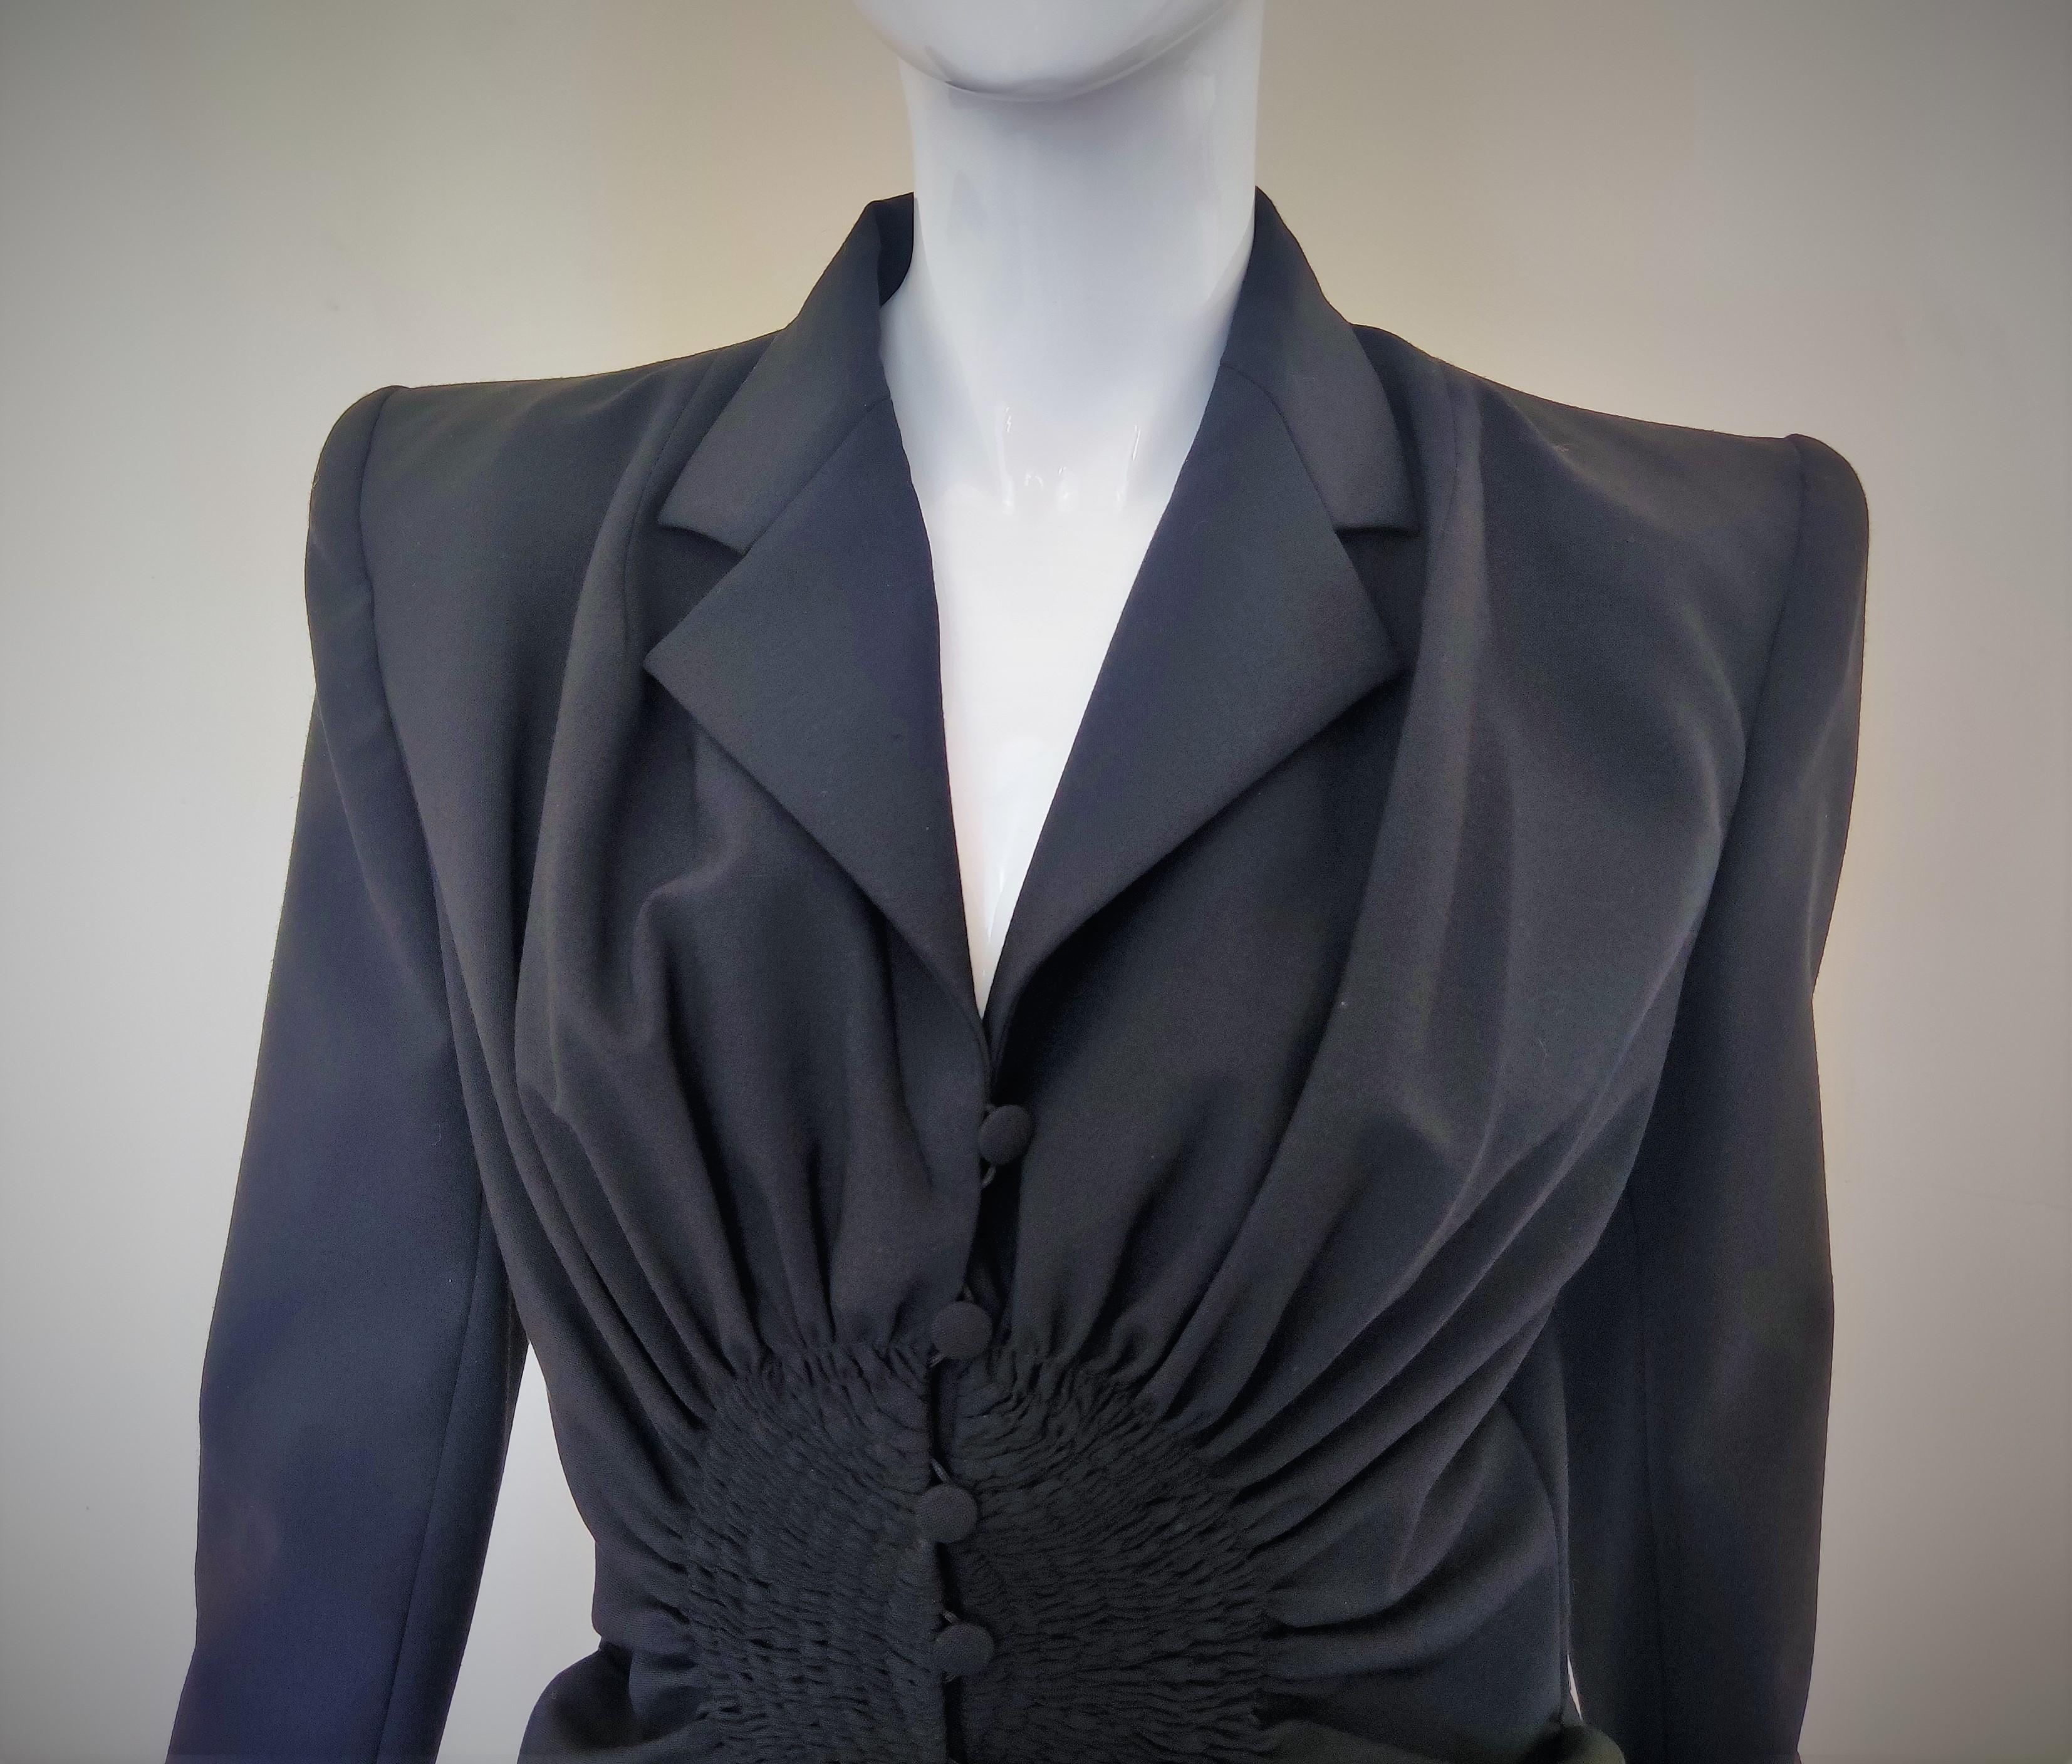 Early John Galliano Ruched Vintage 90s Runway Jacket Skirt Ensemble Dress Suit 7